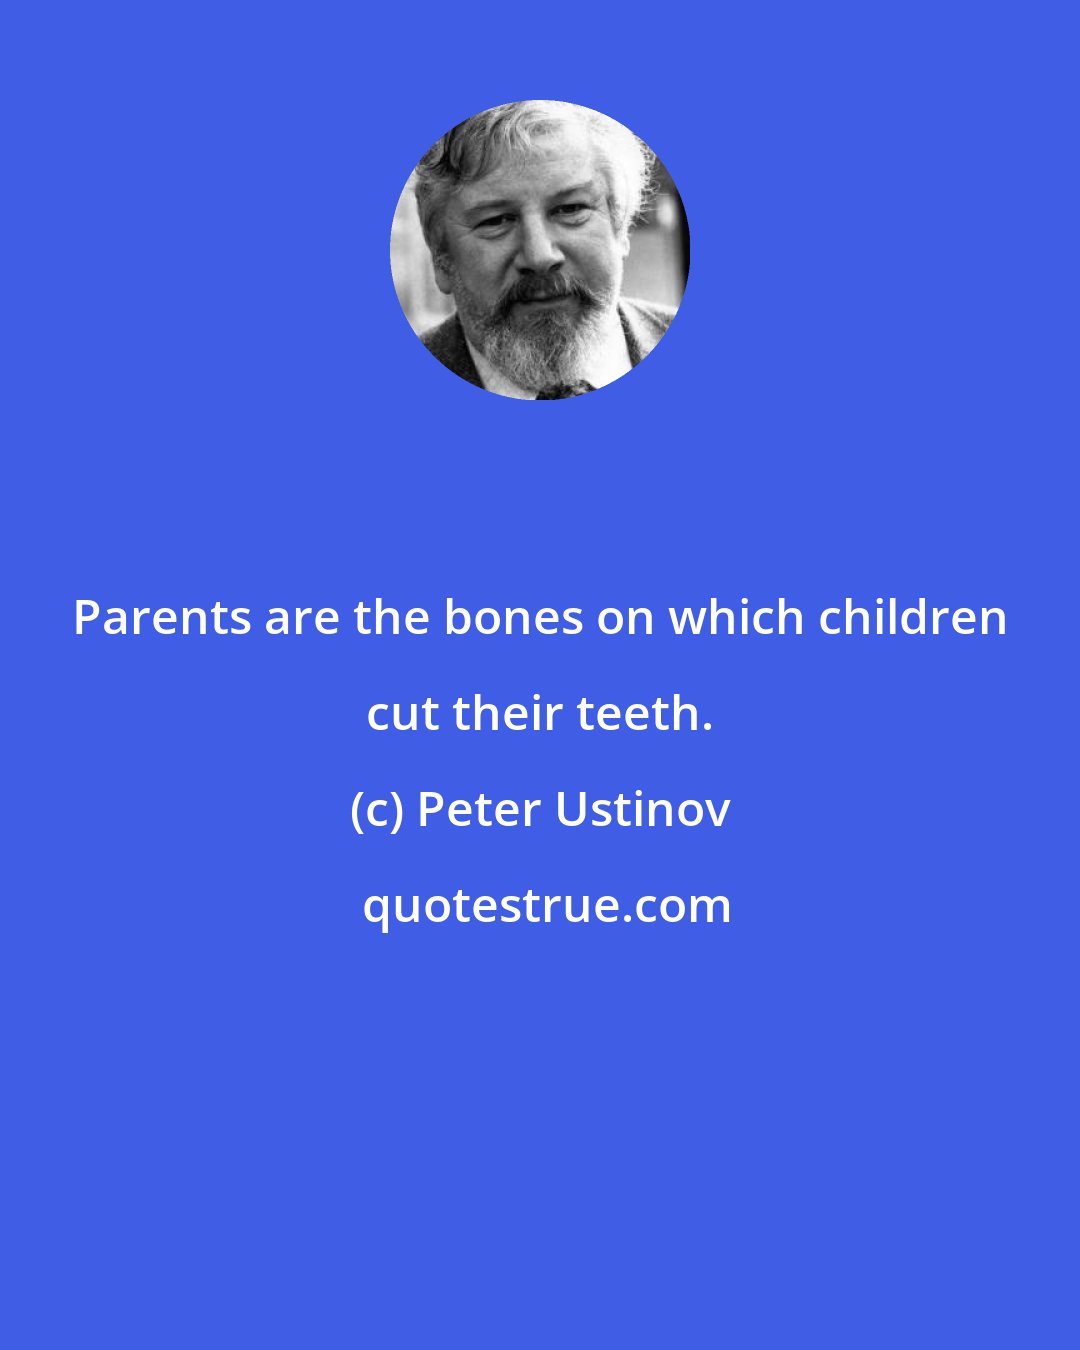 Peter Ustinov: Parents are the bones on which children cut their teeth.